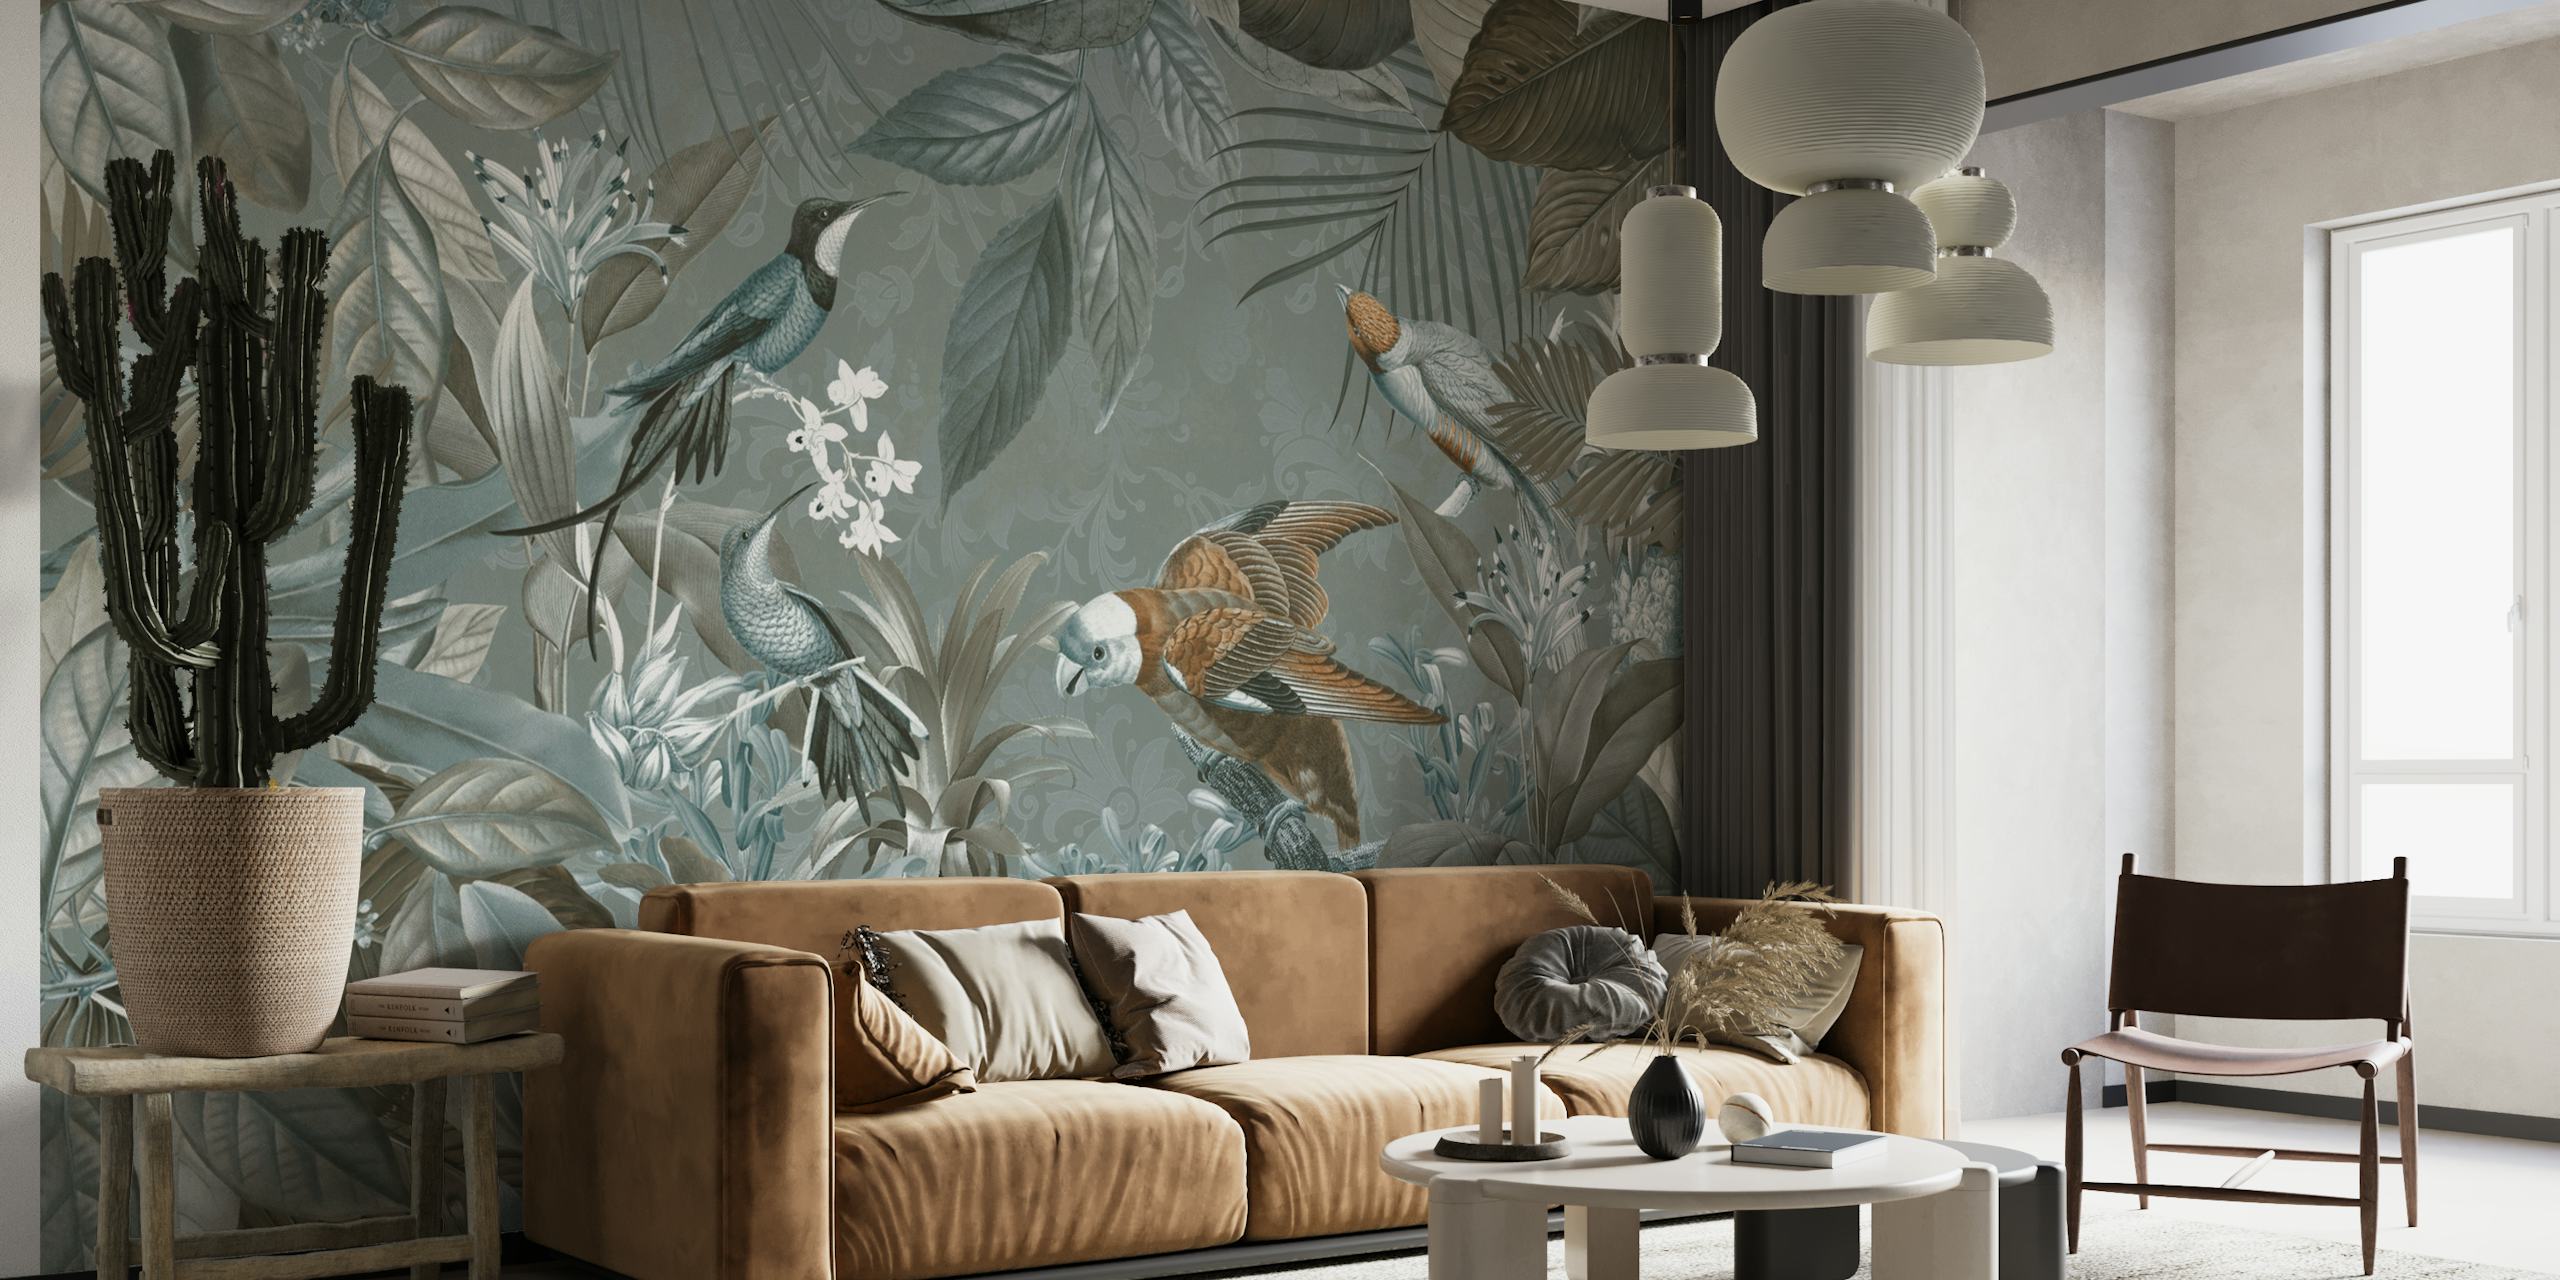 Tropical birds and foliage wall mural in greens and blues